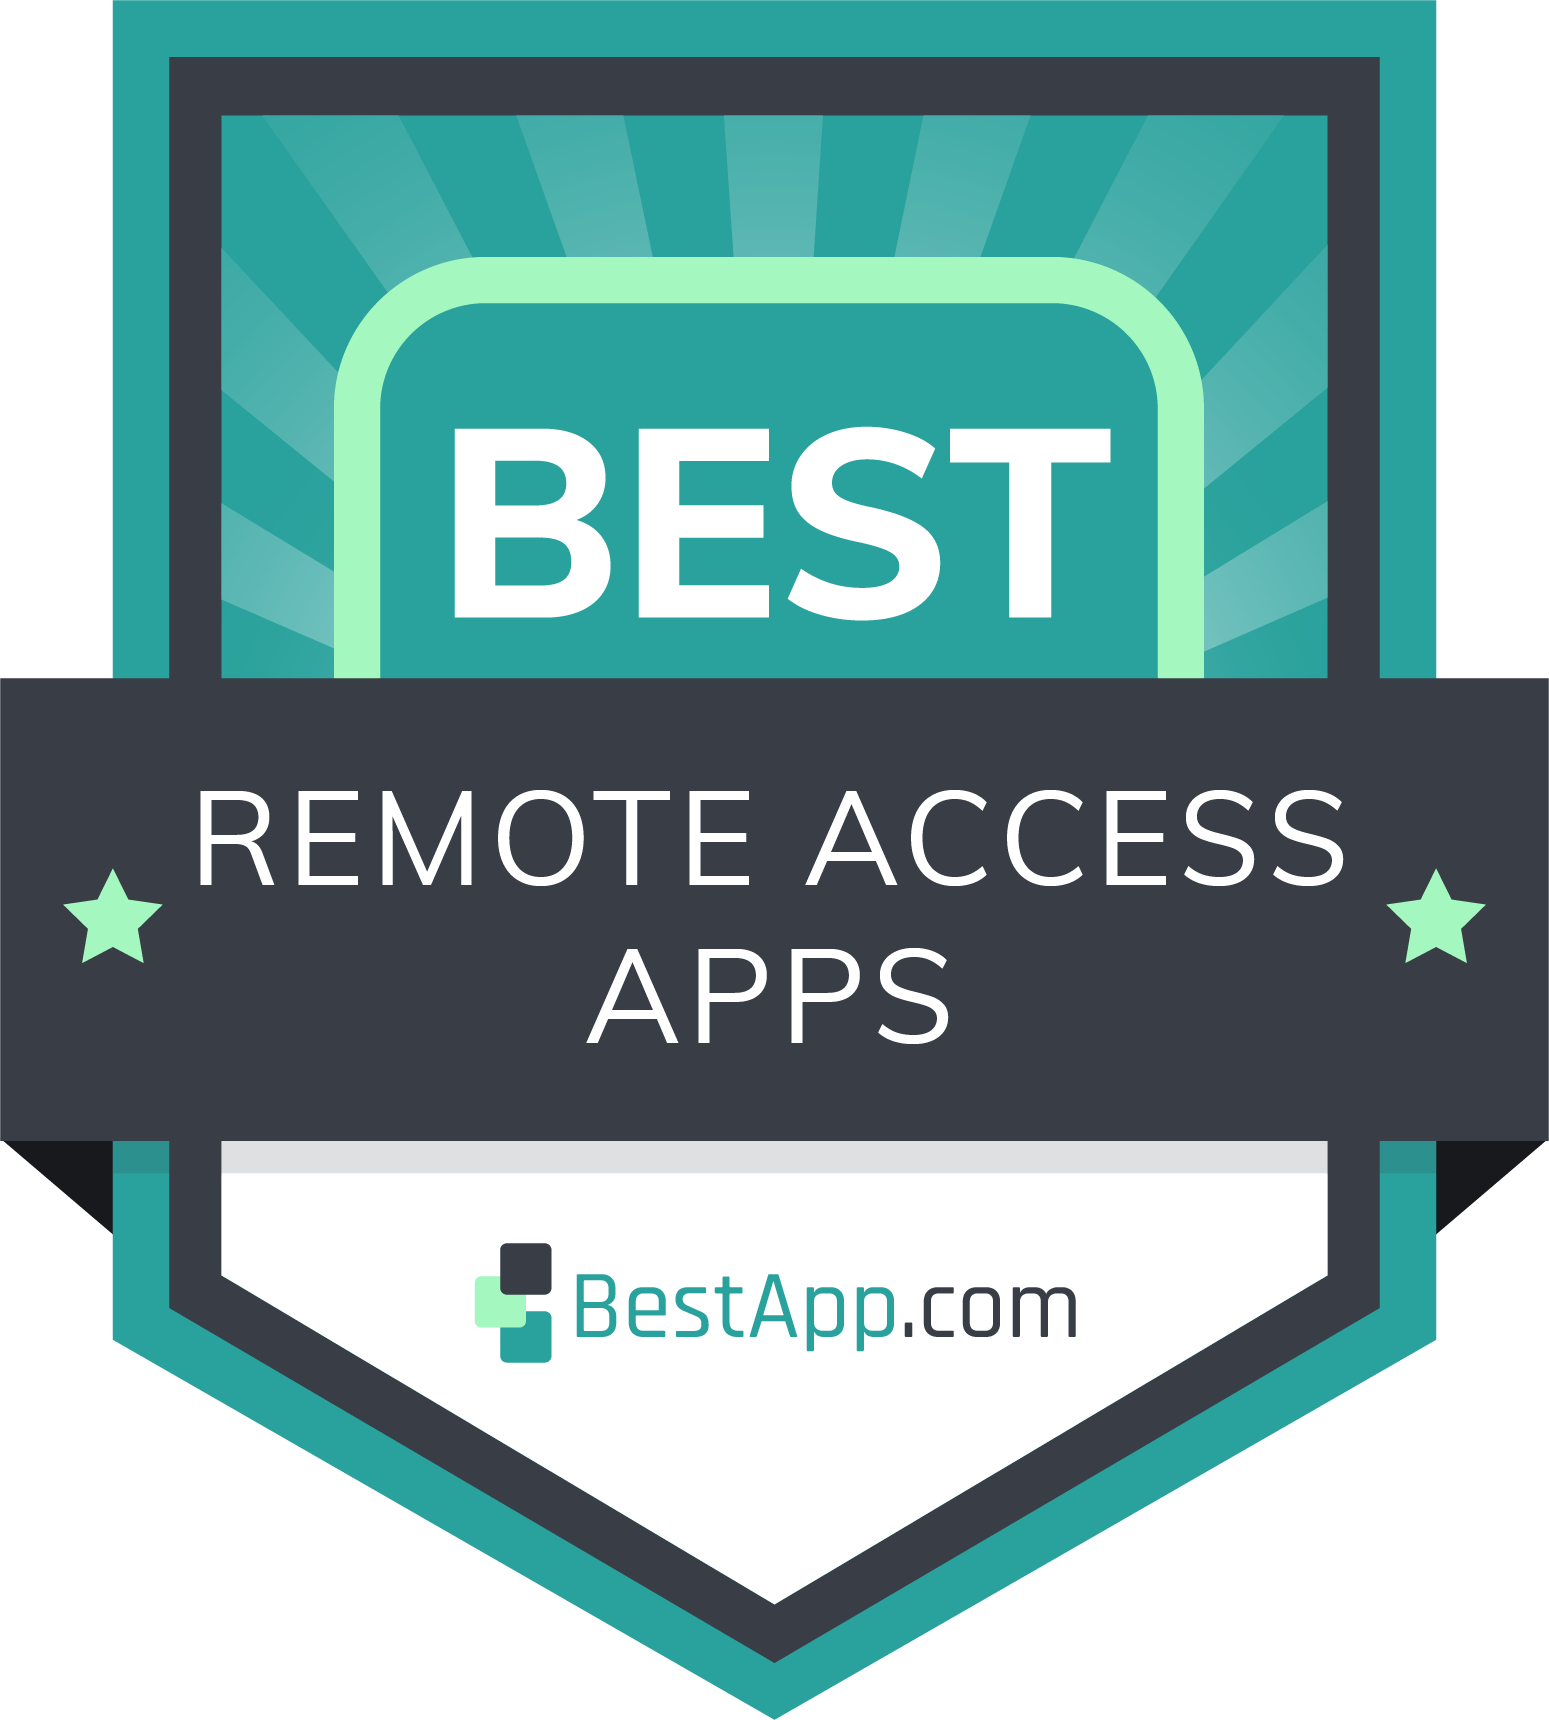 Best Remote Access Apps Badge